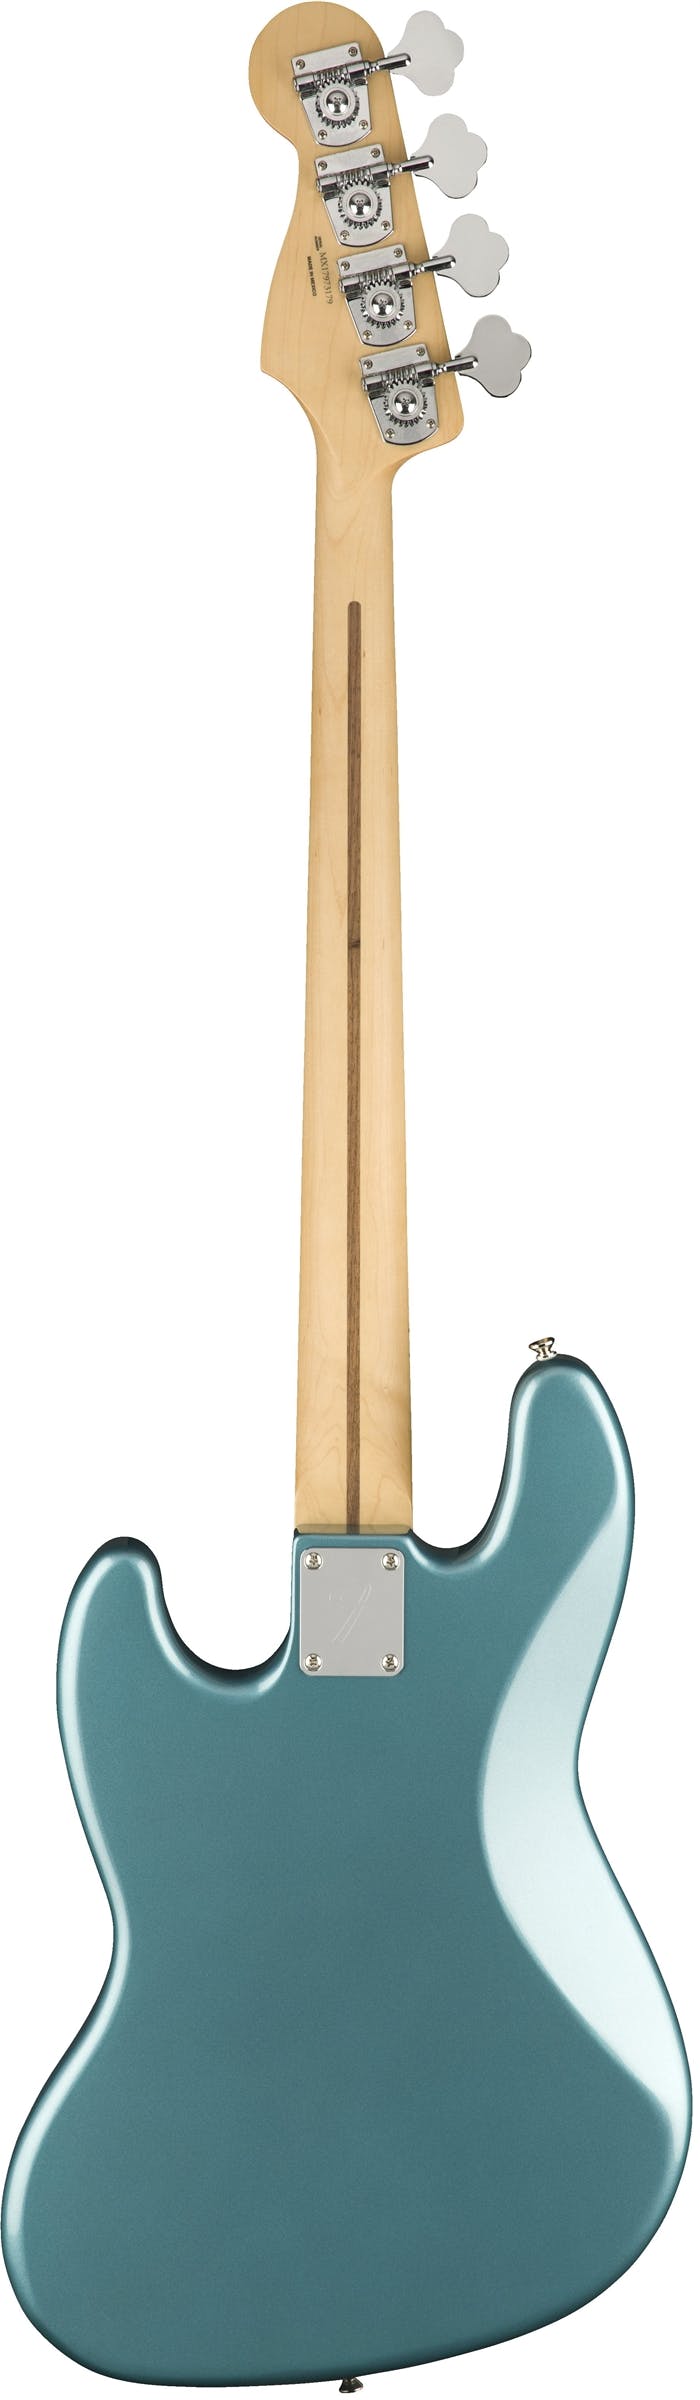 Fender Player Jazz Bass w/ Maple Fretboard in Tidepool - Andertons Music Co.